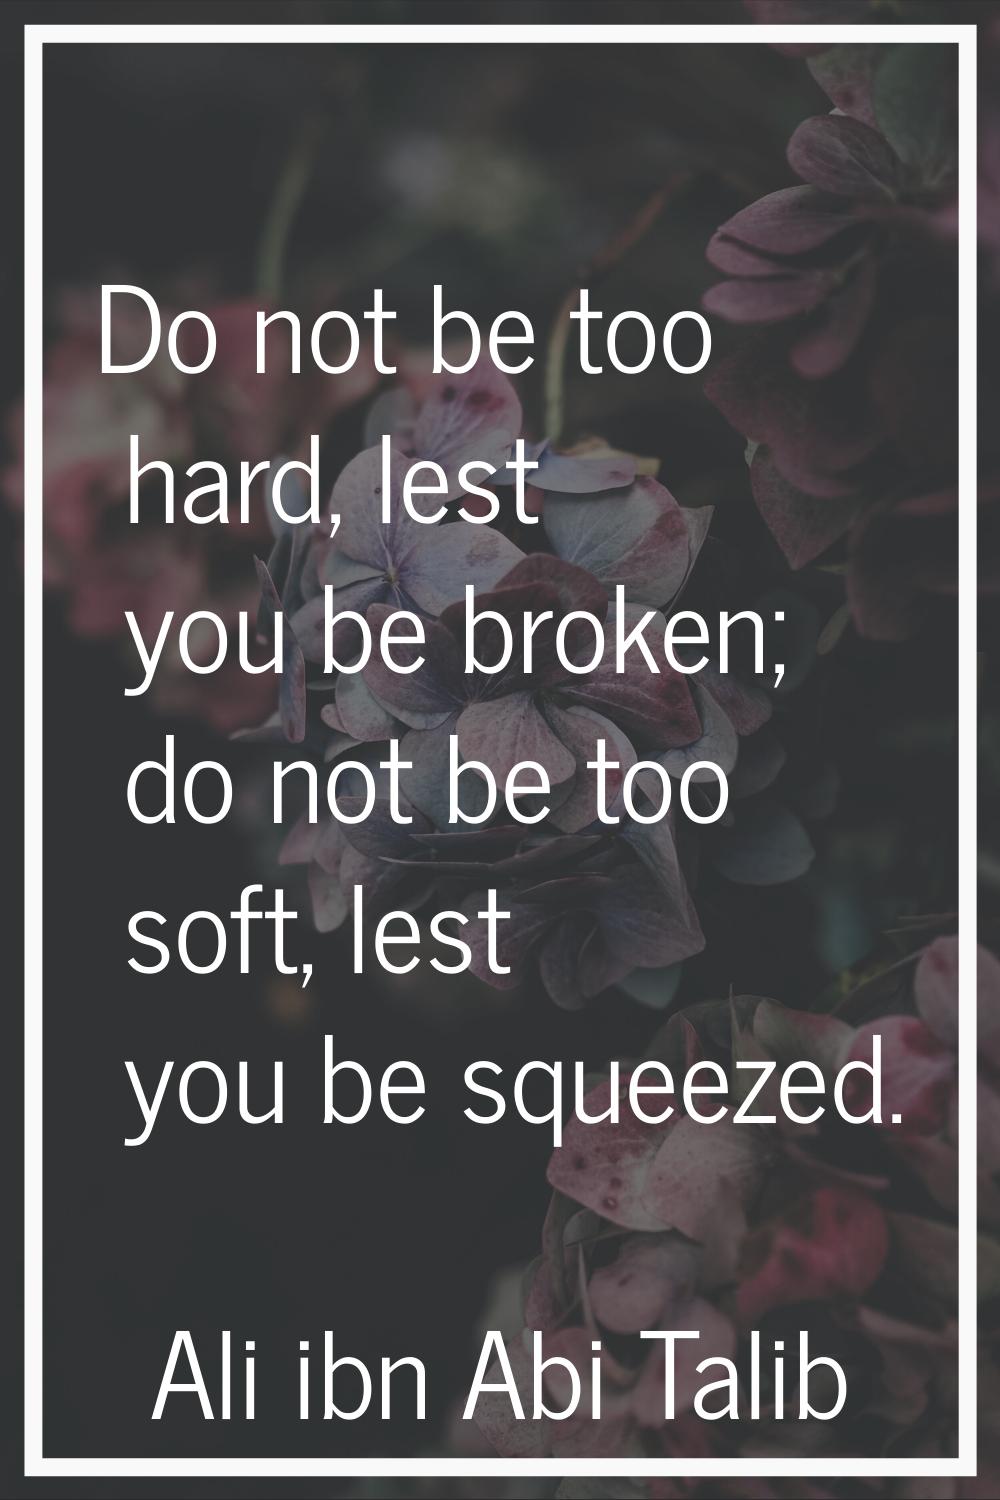 Do not be too hard, lest you be broken; do not be too soft, lest you be squeezed.